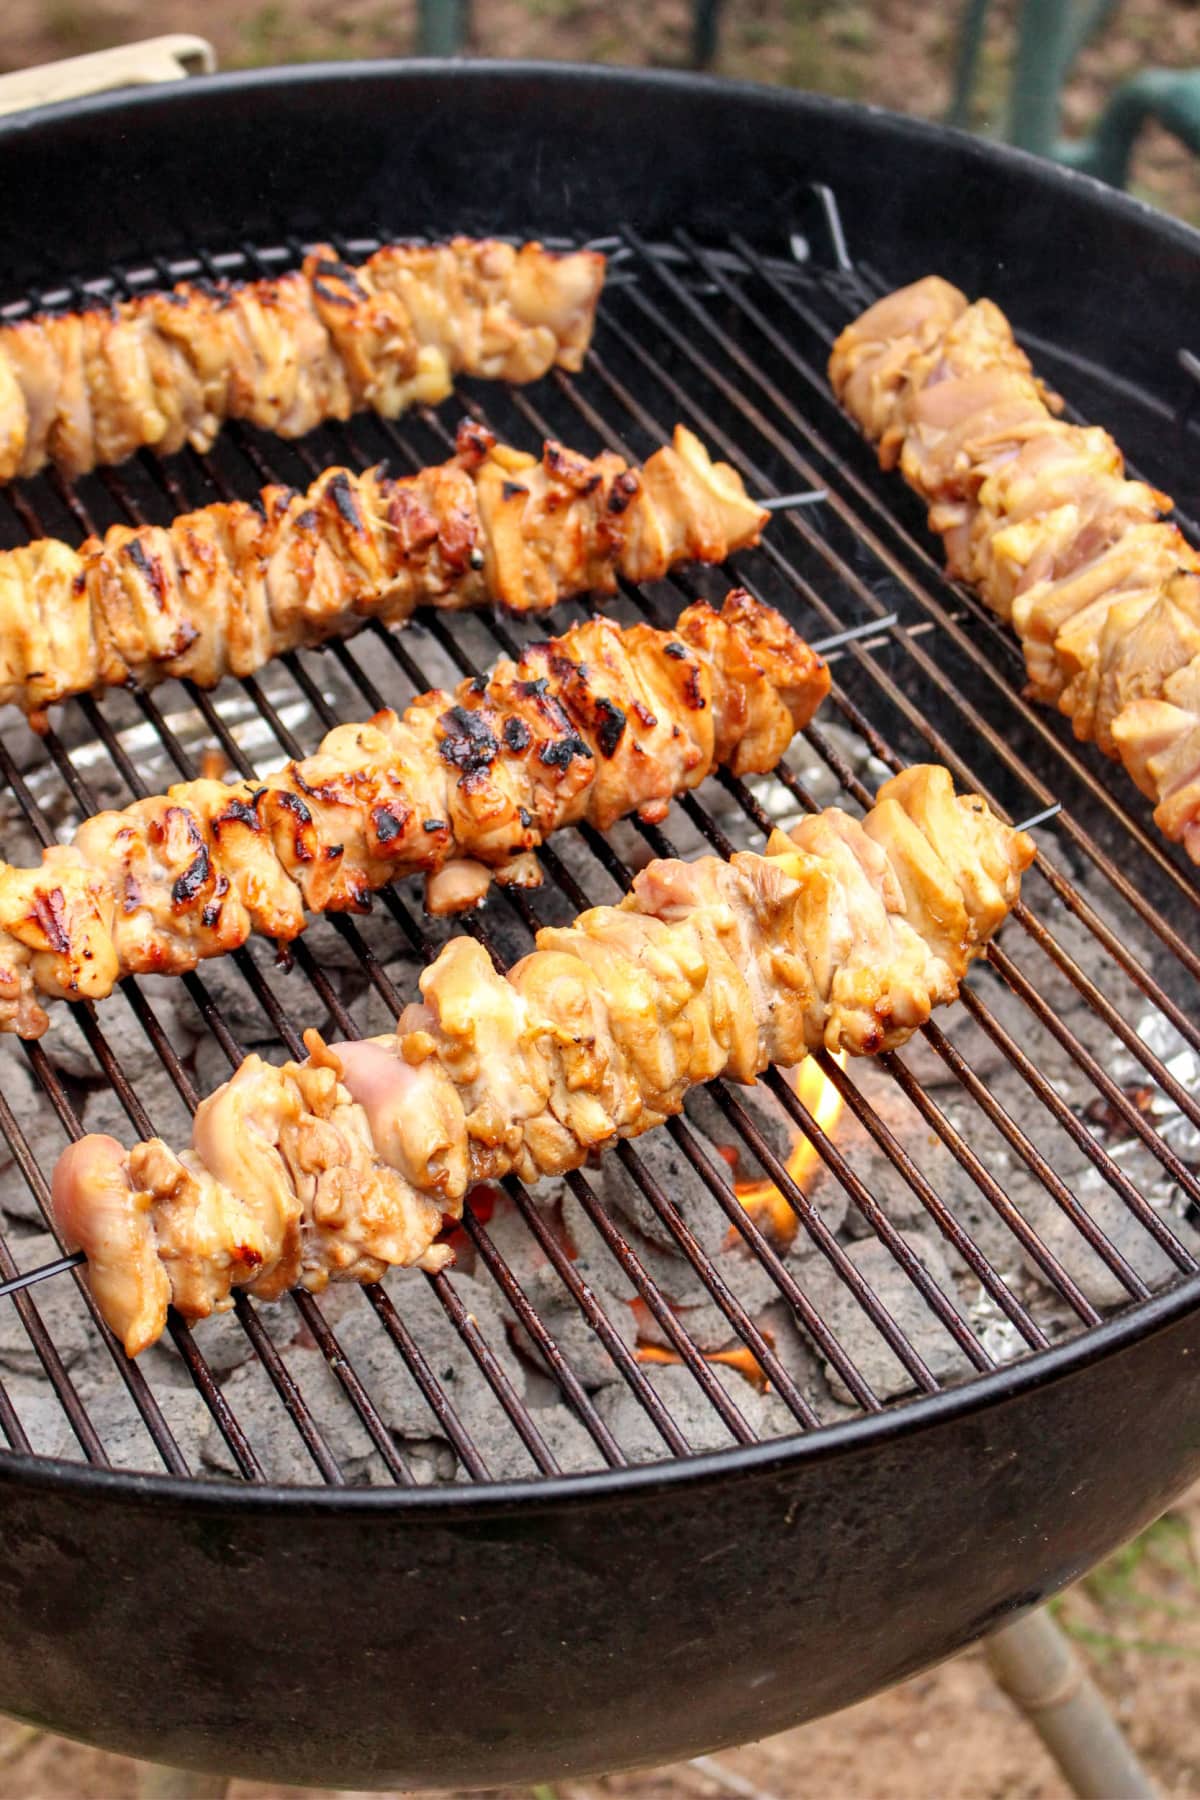 Chicken skewers on a charcoal grill